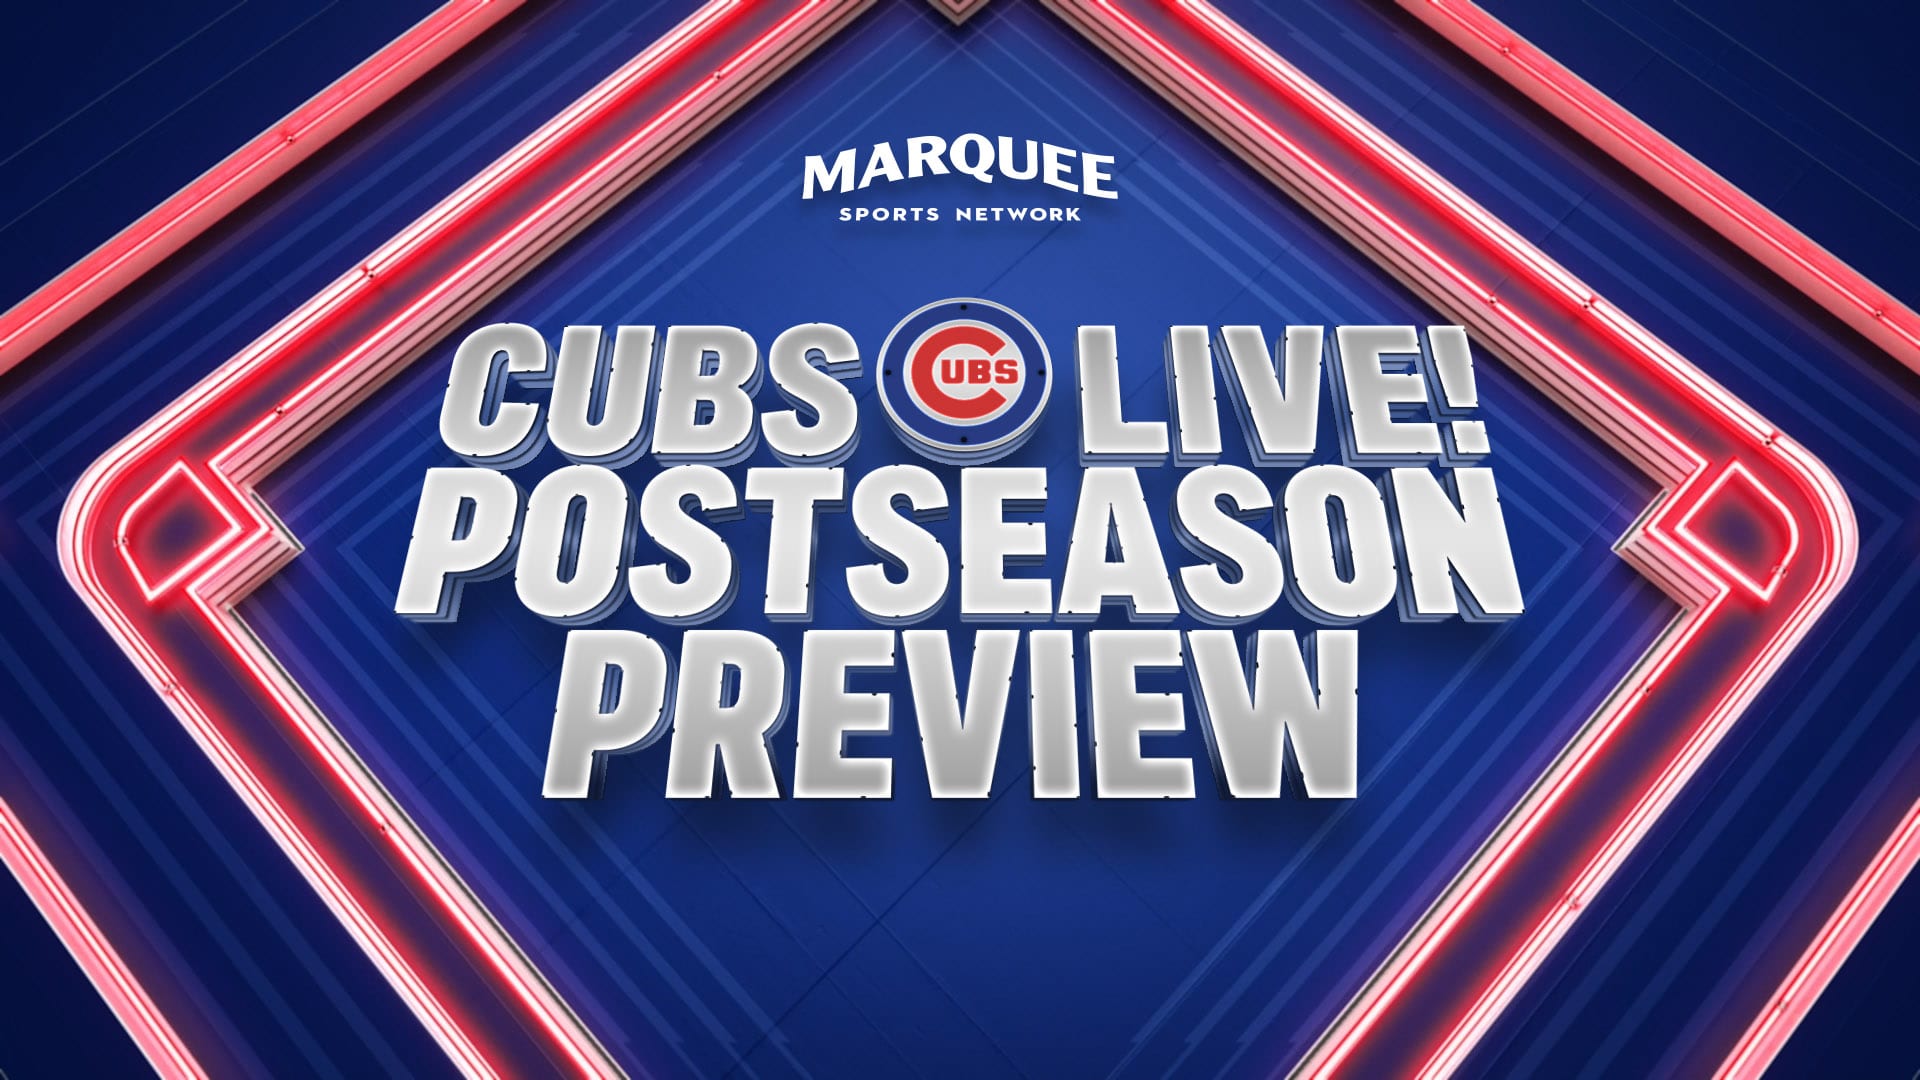 Cubs Live Postseason Preview New 1920x1080